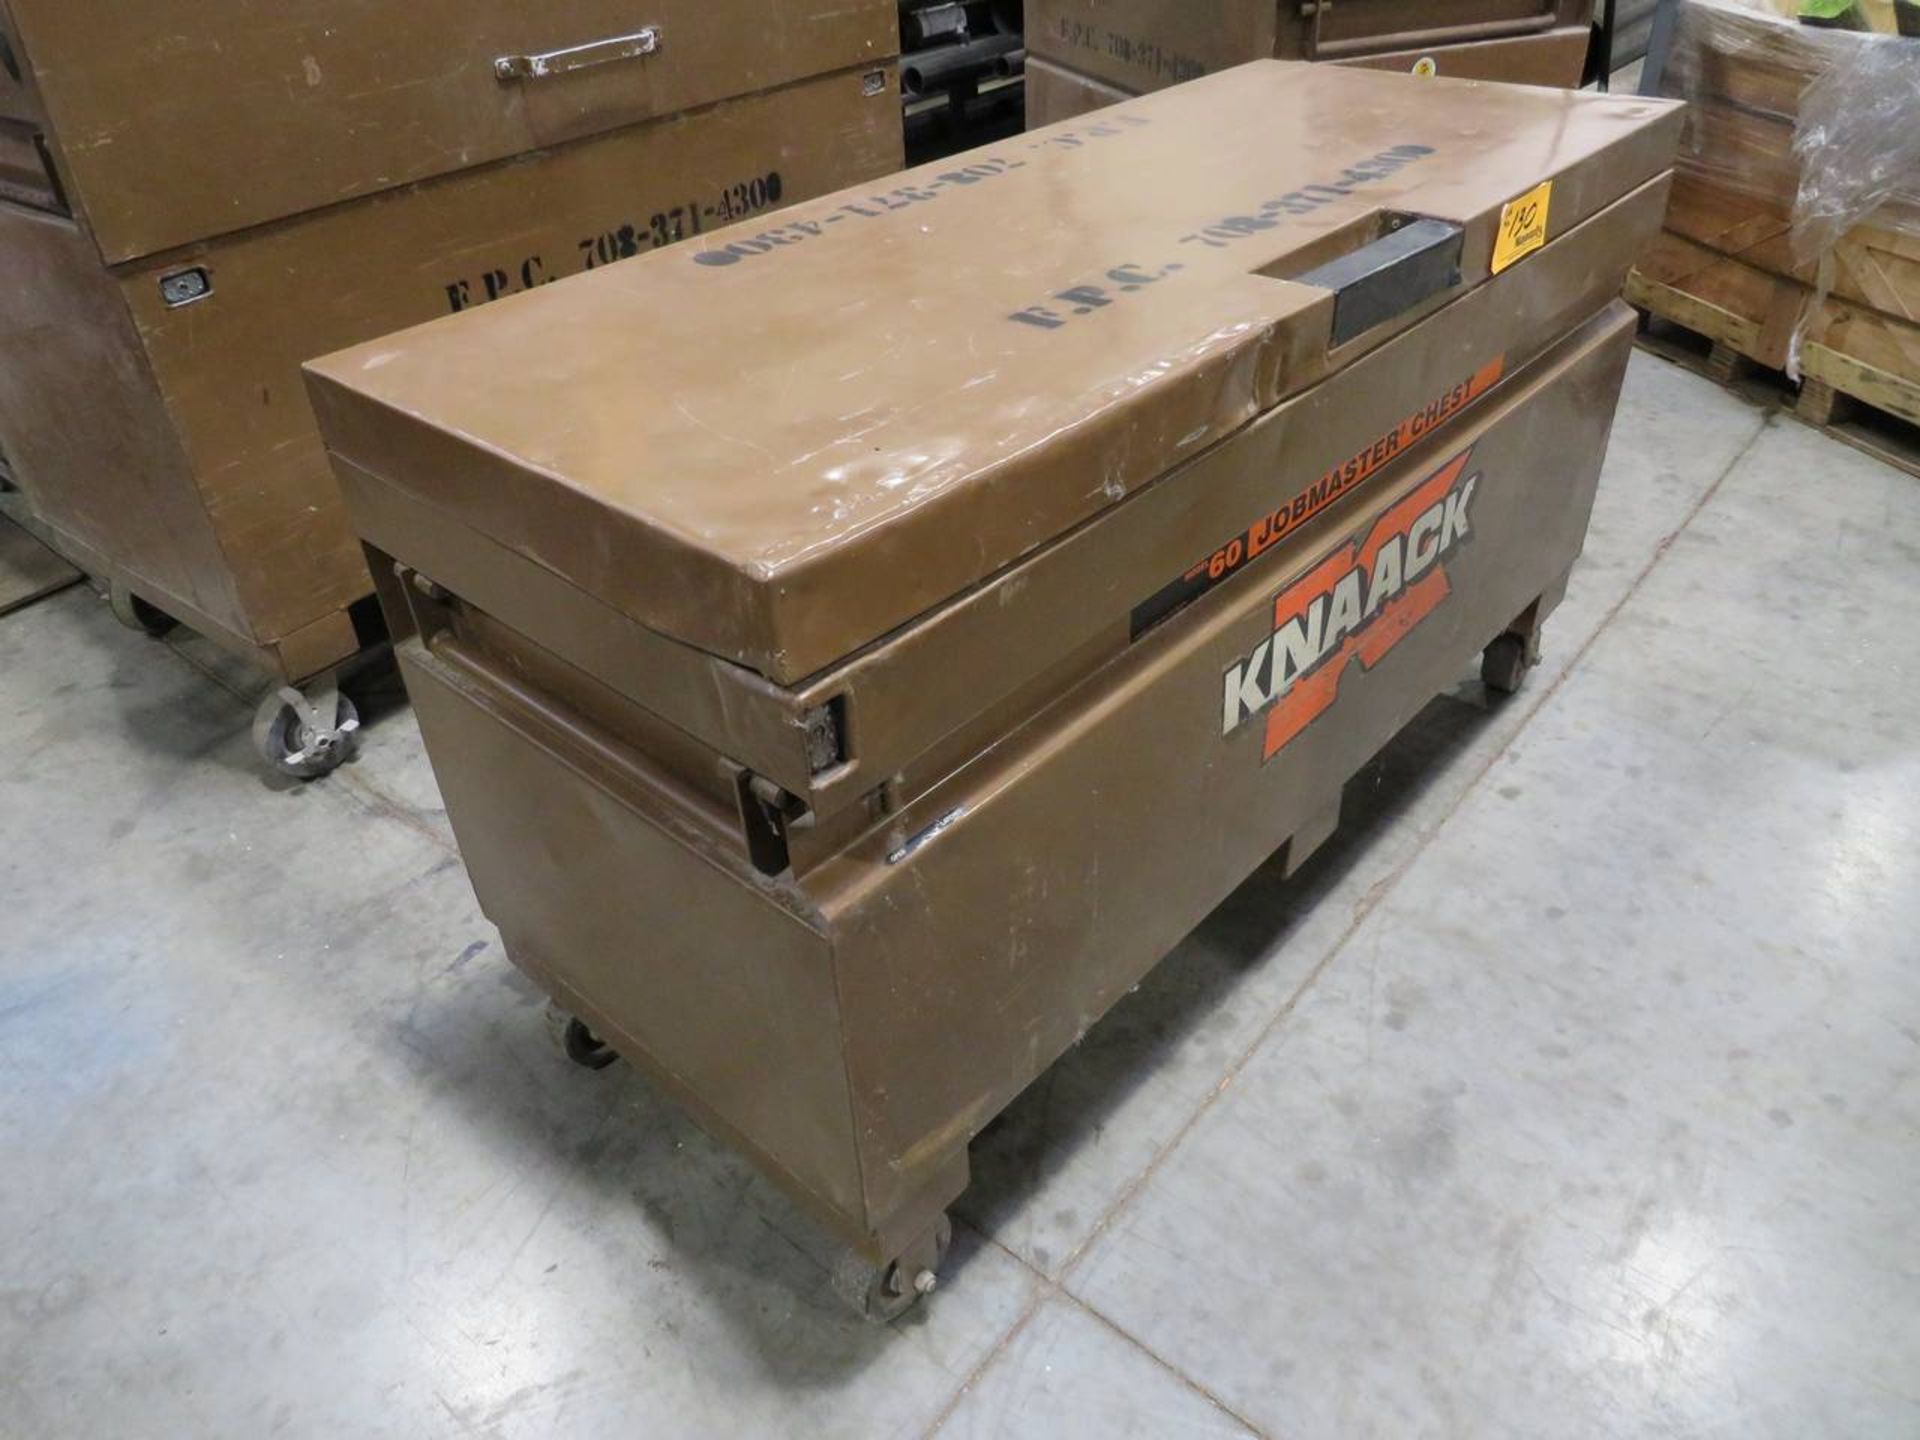 Knaack 60 Job Master 20.25 Cu. Ft. Approx. 60" W x 24" D x 36" H Storage Chest - Image 6 of 9